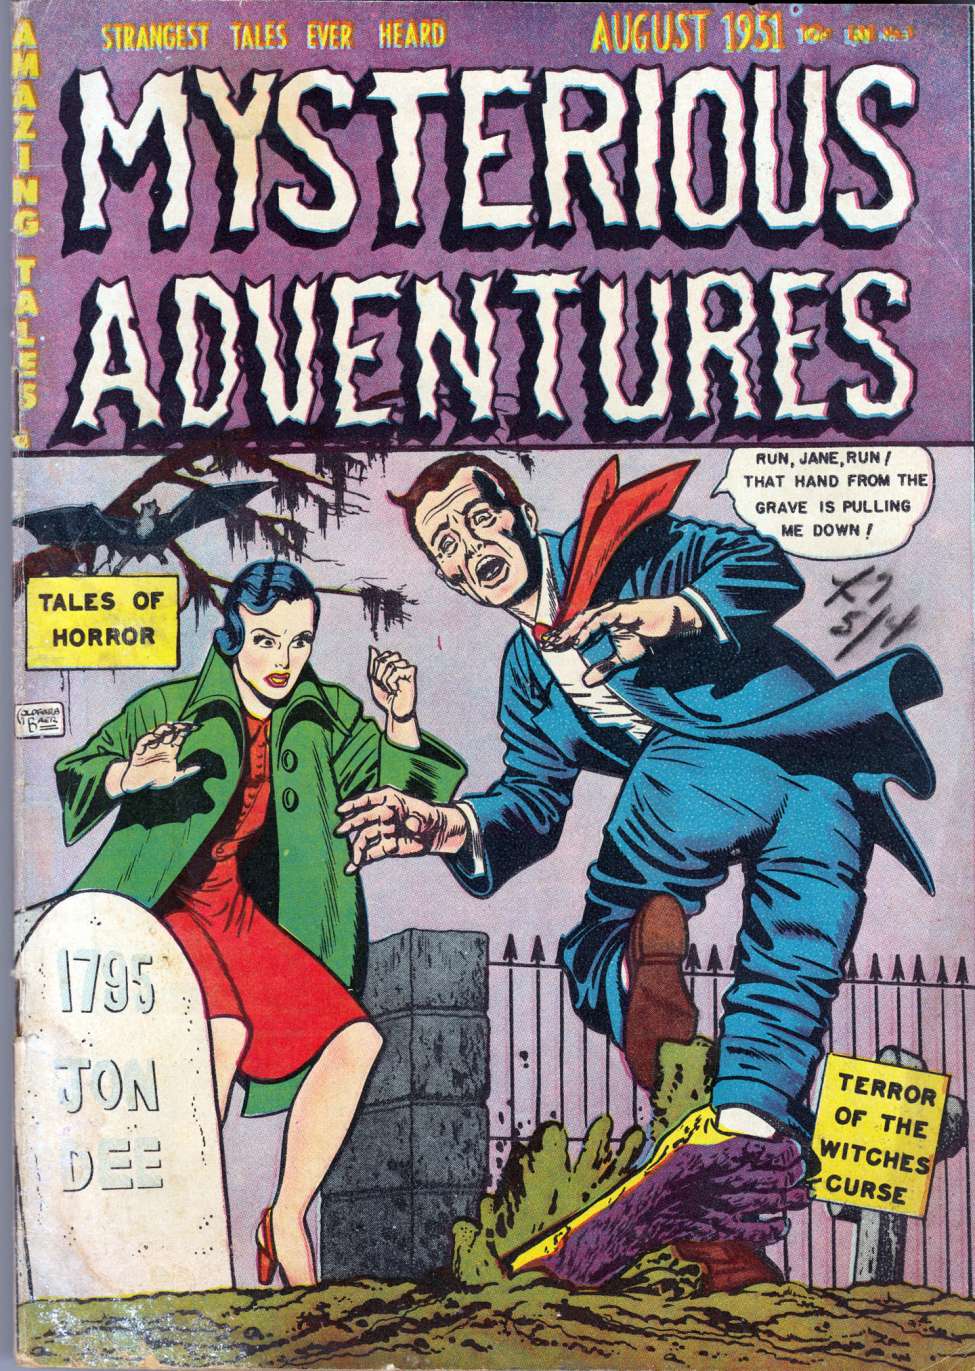 Comic Book Cover For Mysterious Adventures 3 (alt) - Version 2